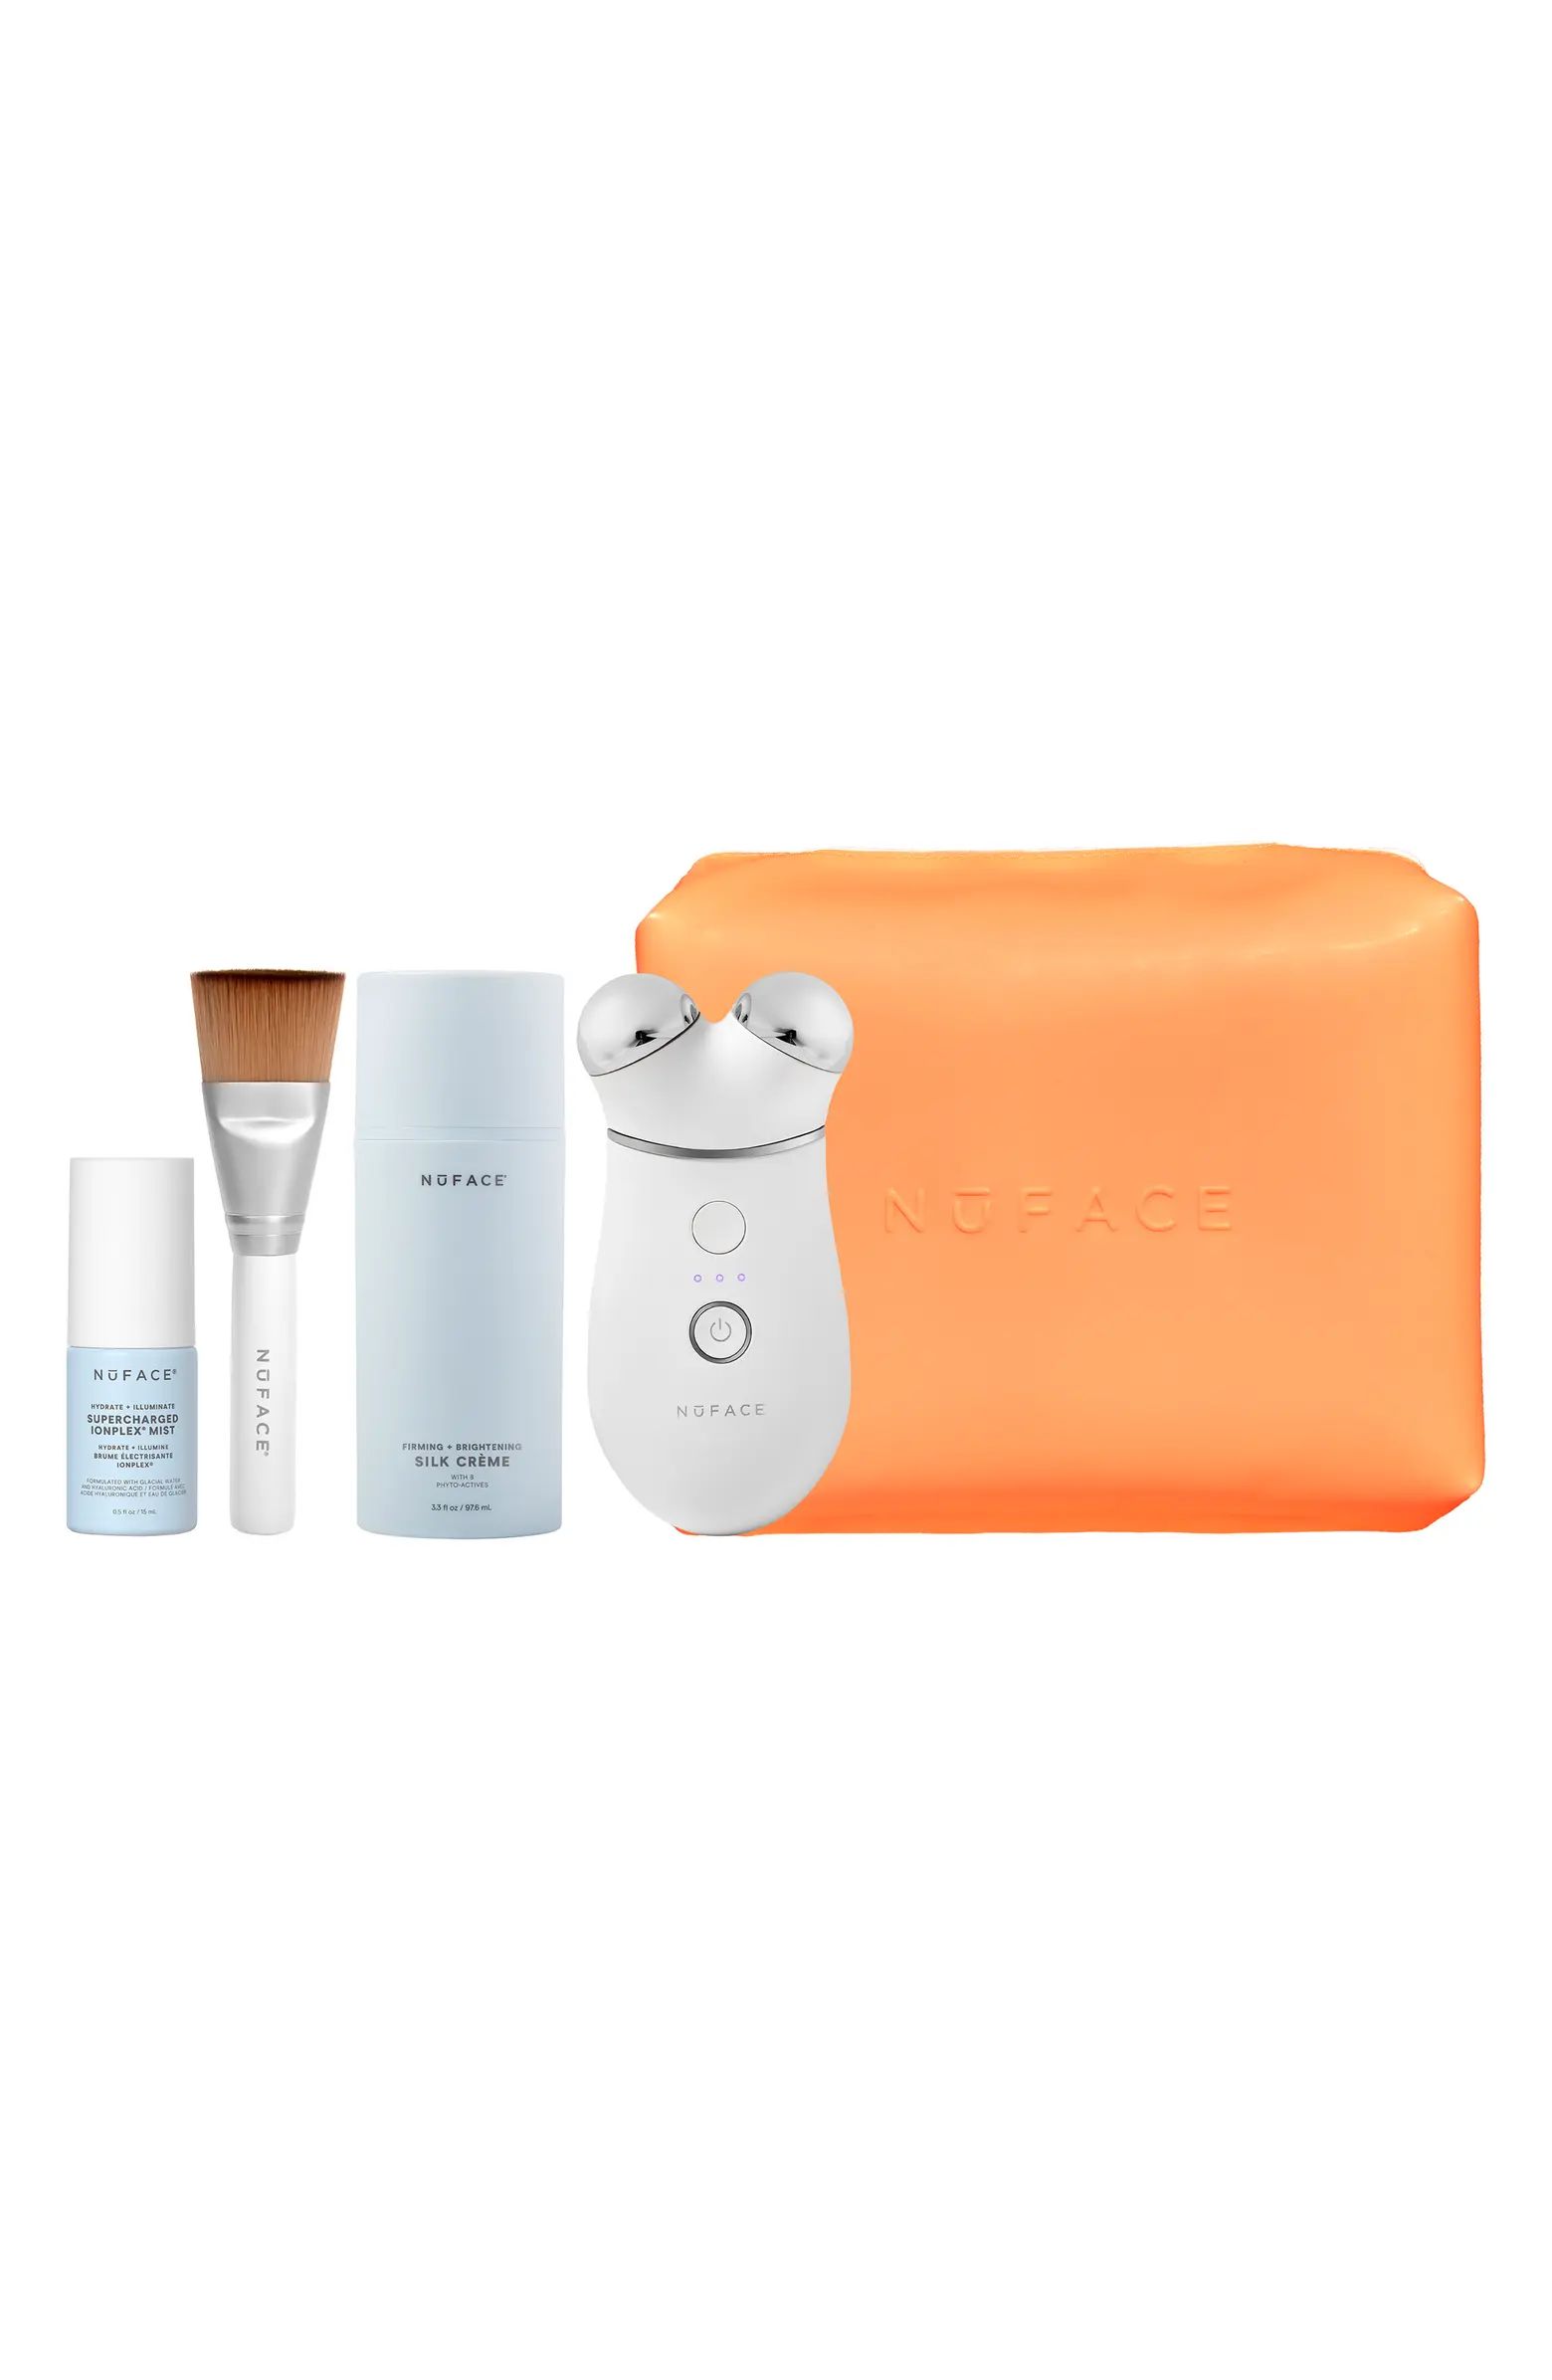 TRINITY+ Supercharged Skin Care Routine Set (Limited Edition) USD $509 Value | Nordstrom